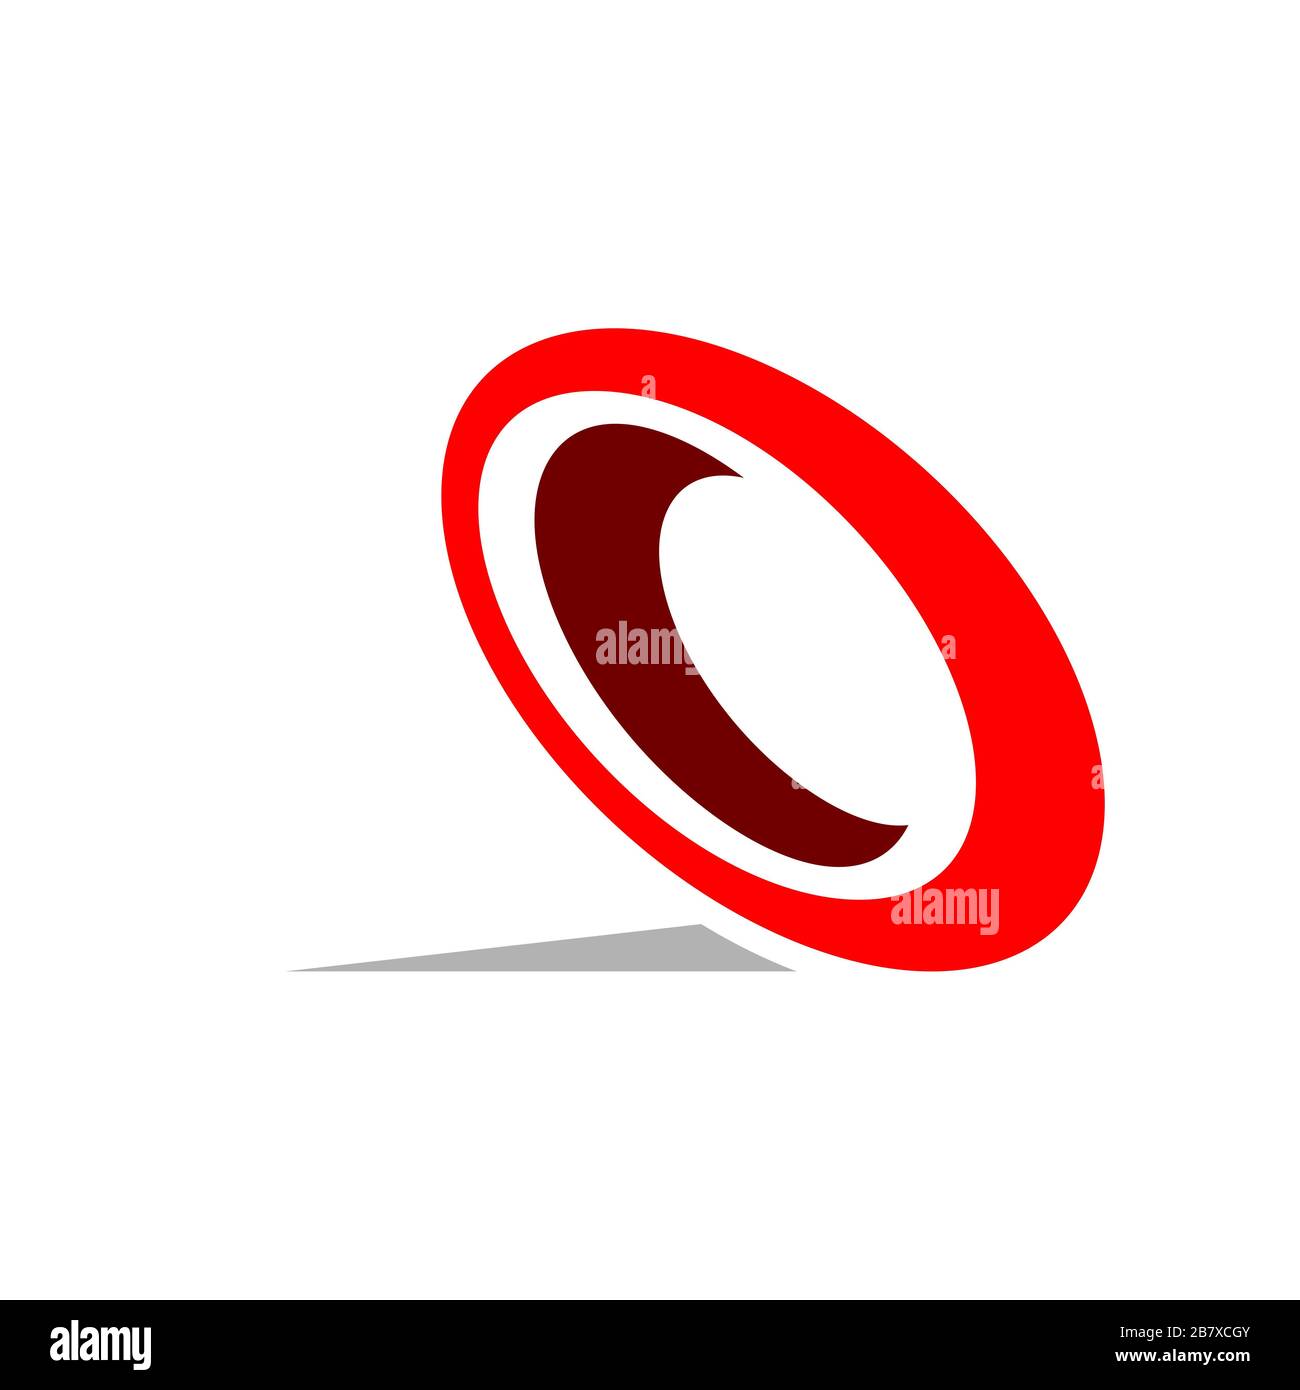 Red Circle Ring Logo Template Illustration Design. Vector EPS 10. Stock Photo